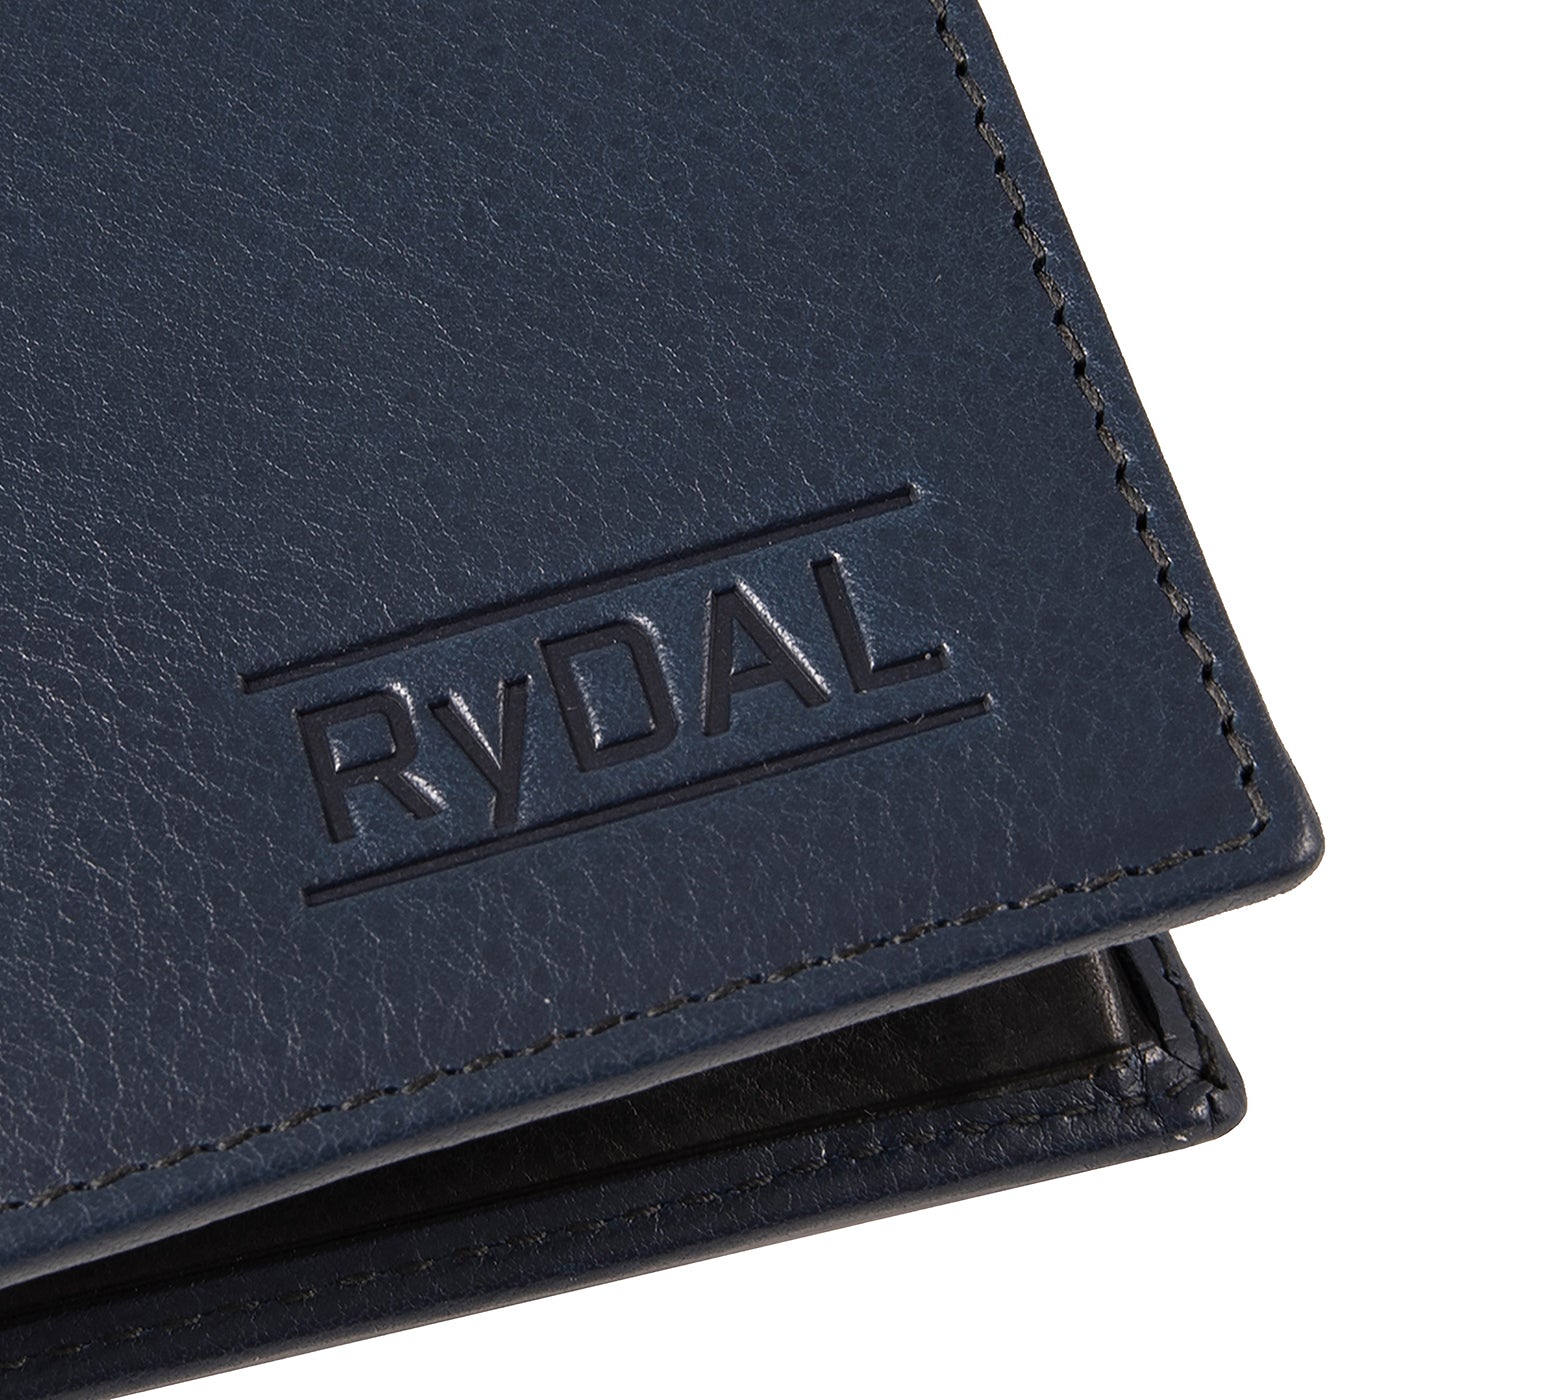 Mens Leather Wallet with Coin Pocket from Rydal in 'Royal Blue/Black' showing close up of logo.